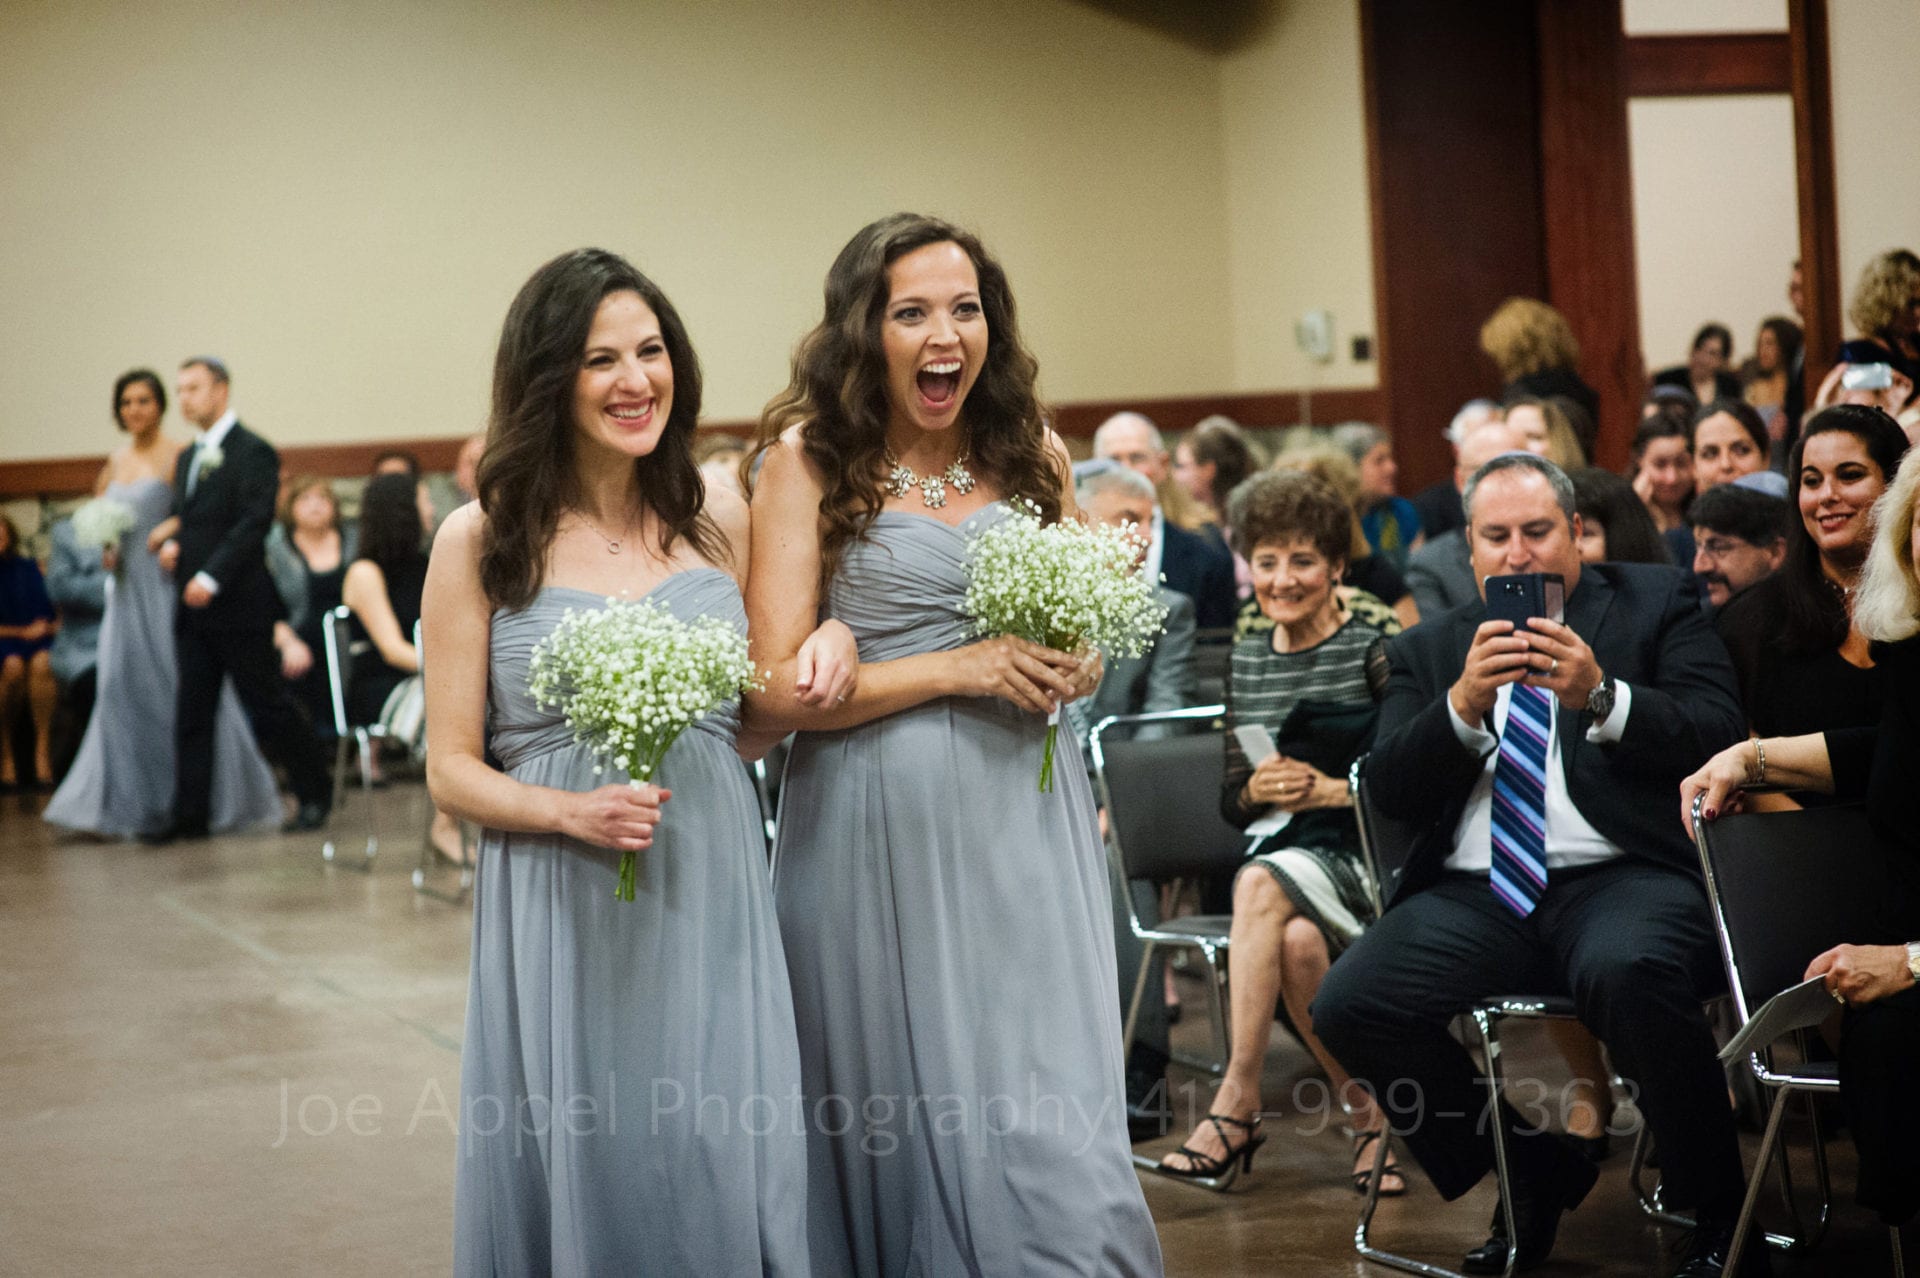 Two pregnant smiling bridesmaids carry flowers and walk down an aisle at a wedding.